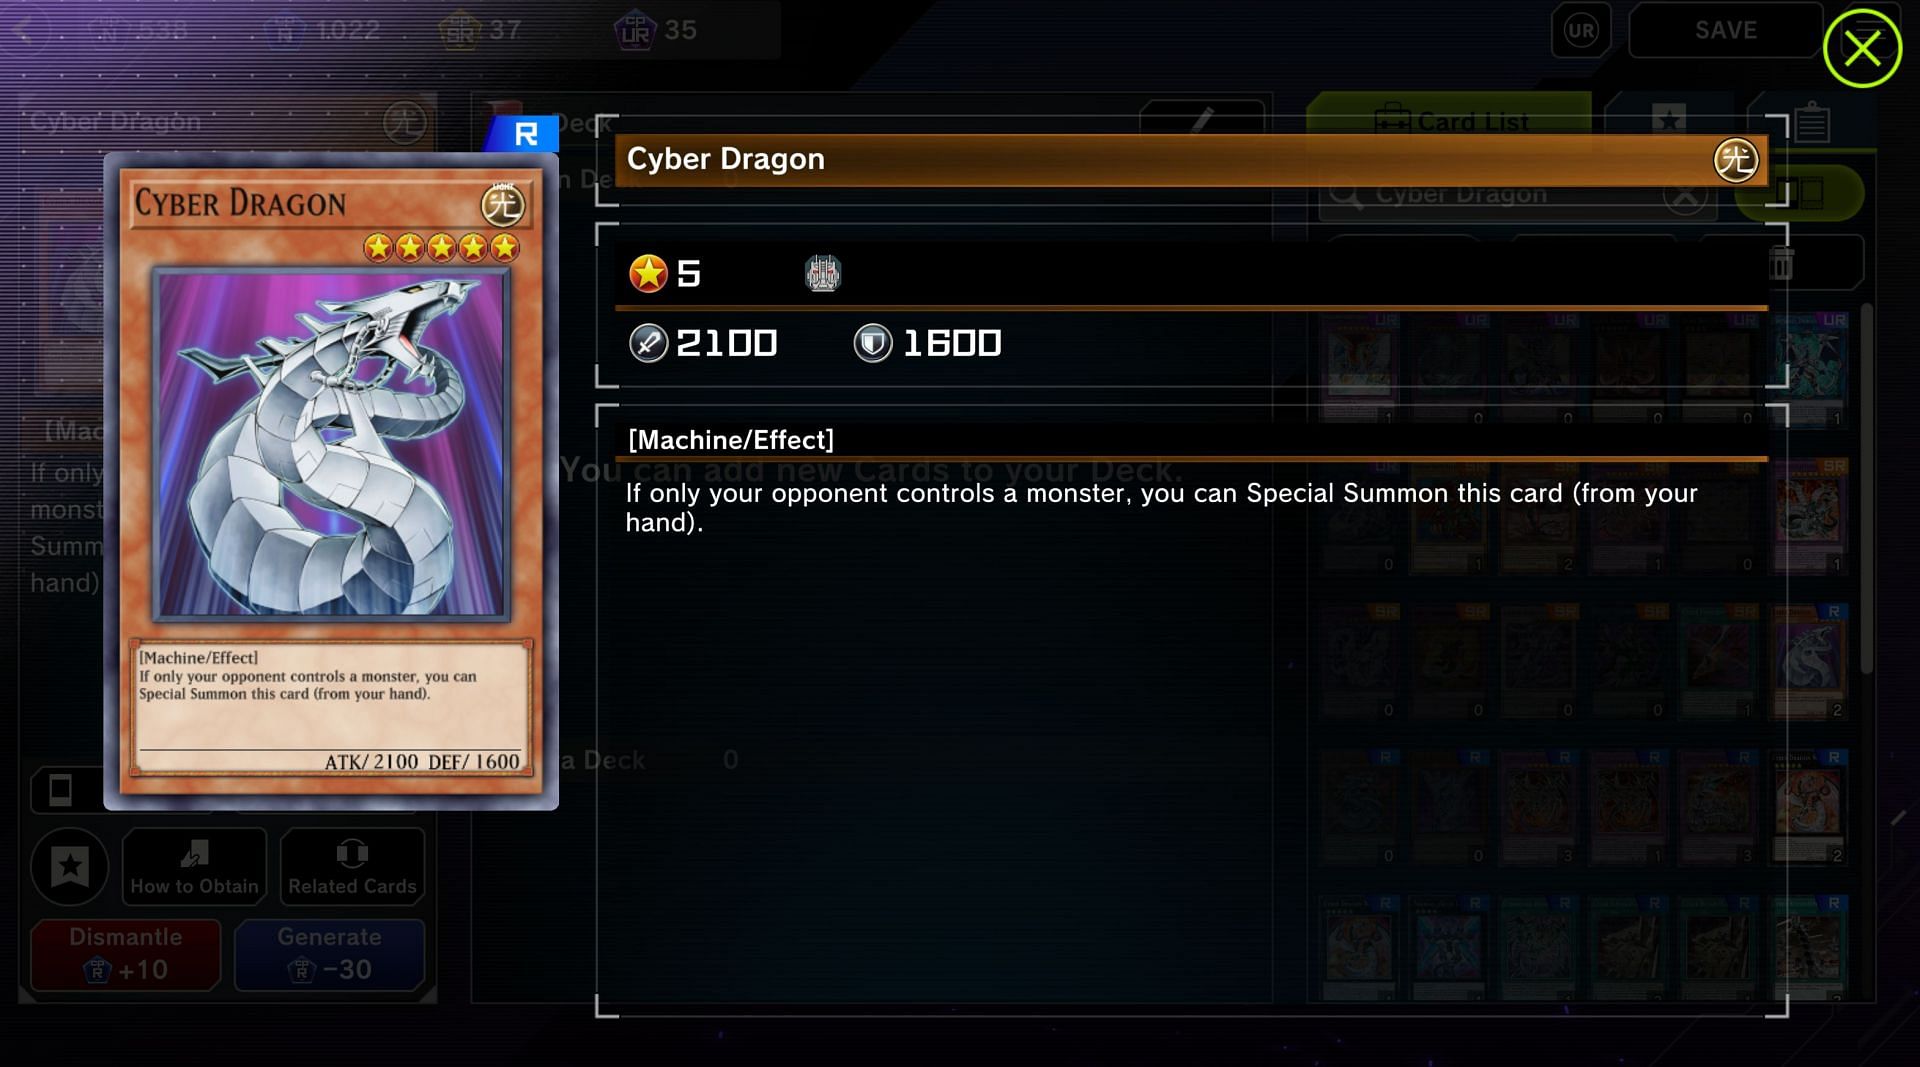 The Cyber Dragon is a terrific turn-one card, if not going first, to special summon (Image via Konami)